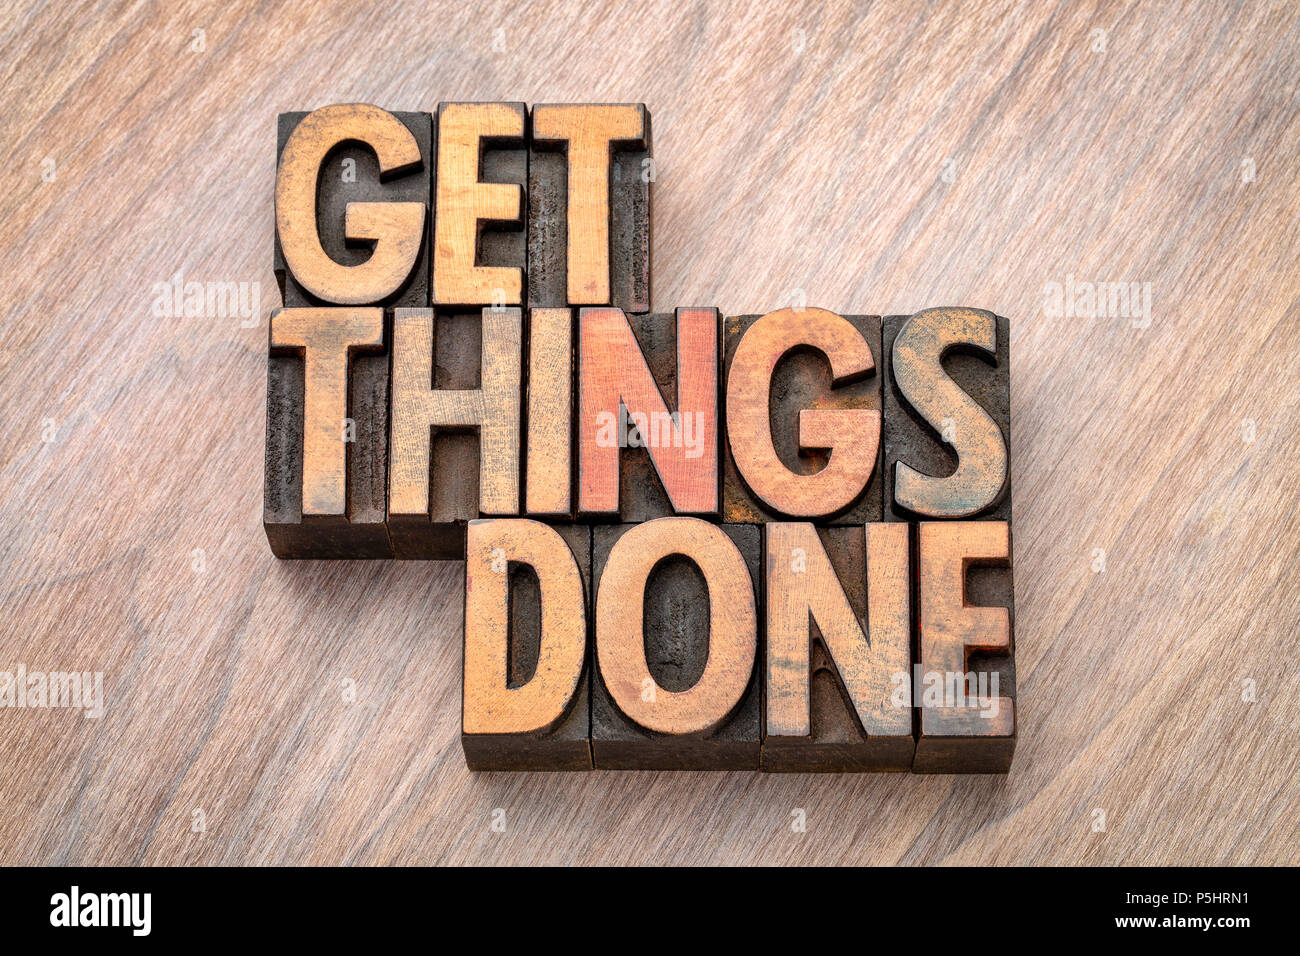 get things done - word abstract in vintage letterpress wood type blocks Stock Photo